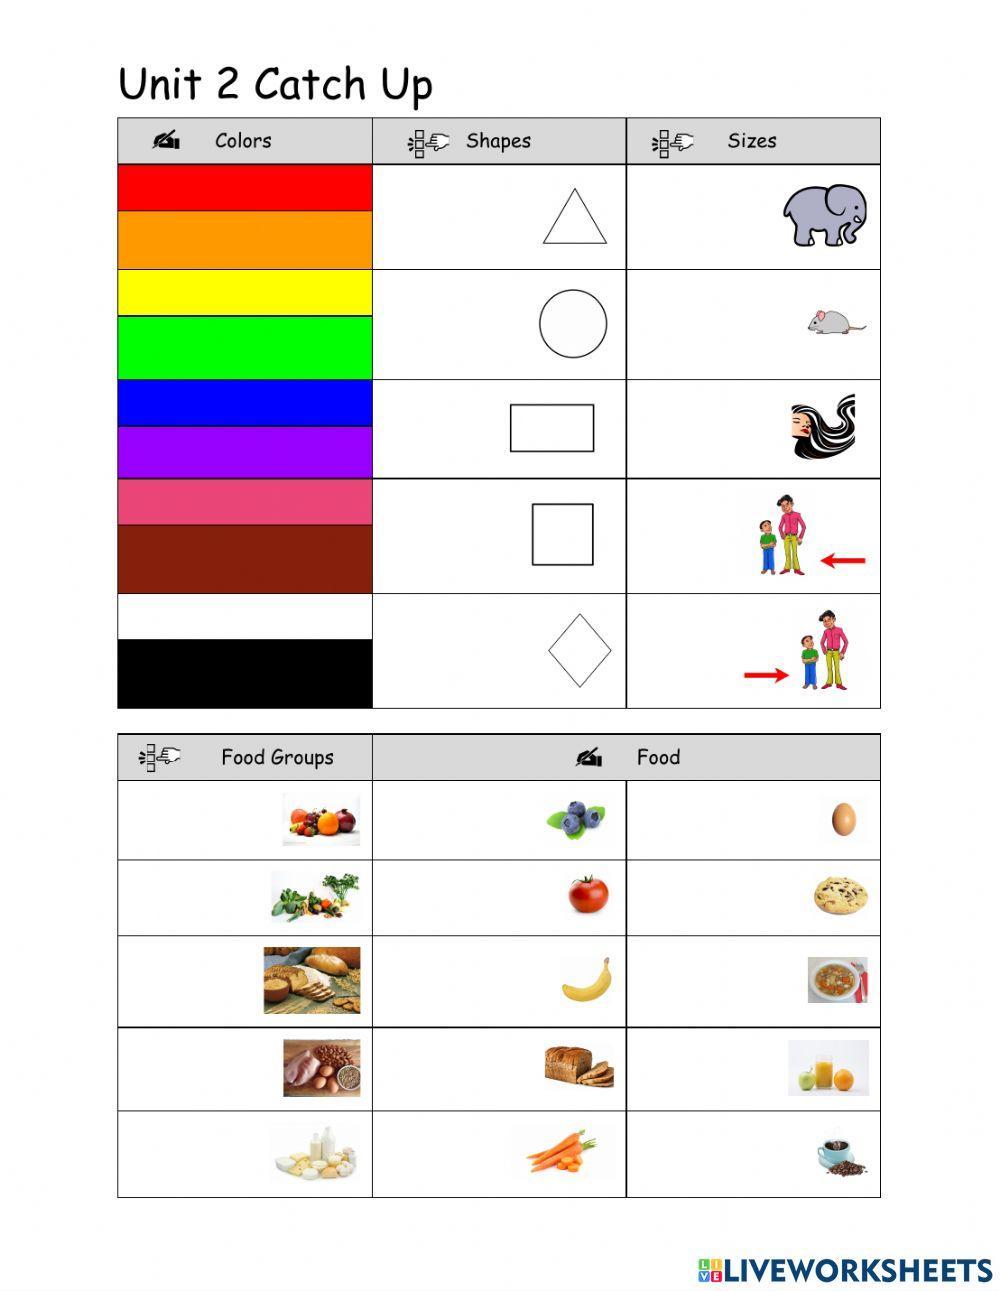 Colors, Shapes, Sizes, Food Vocabulary